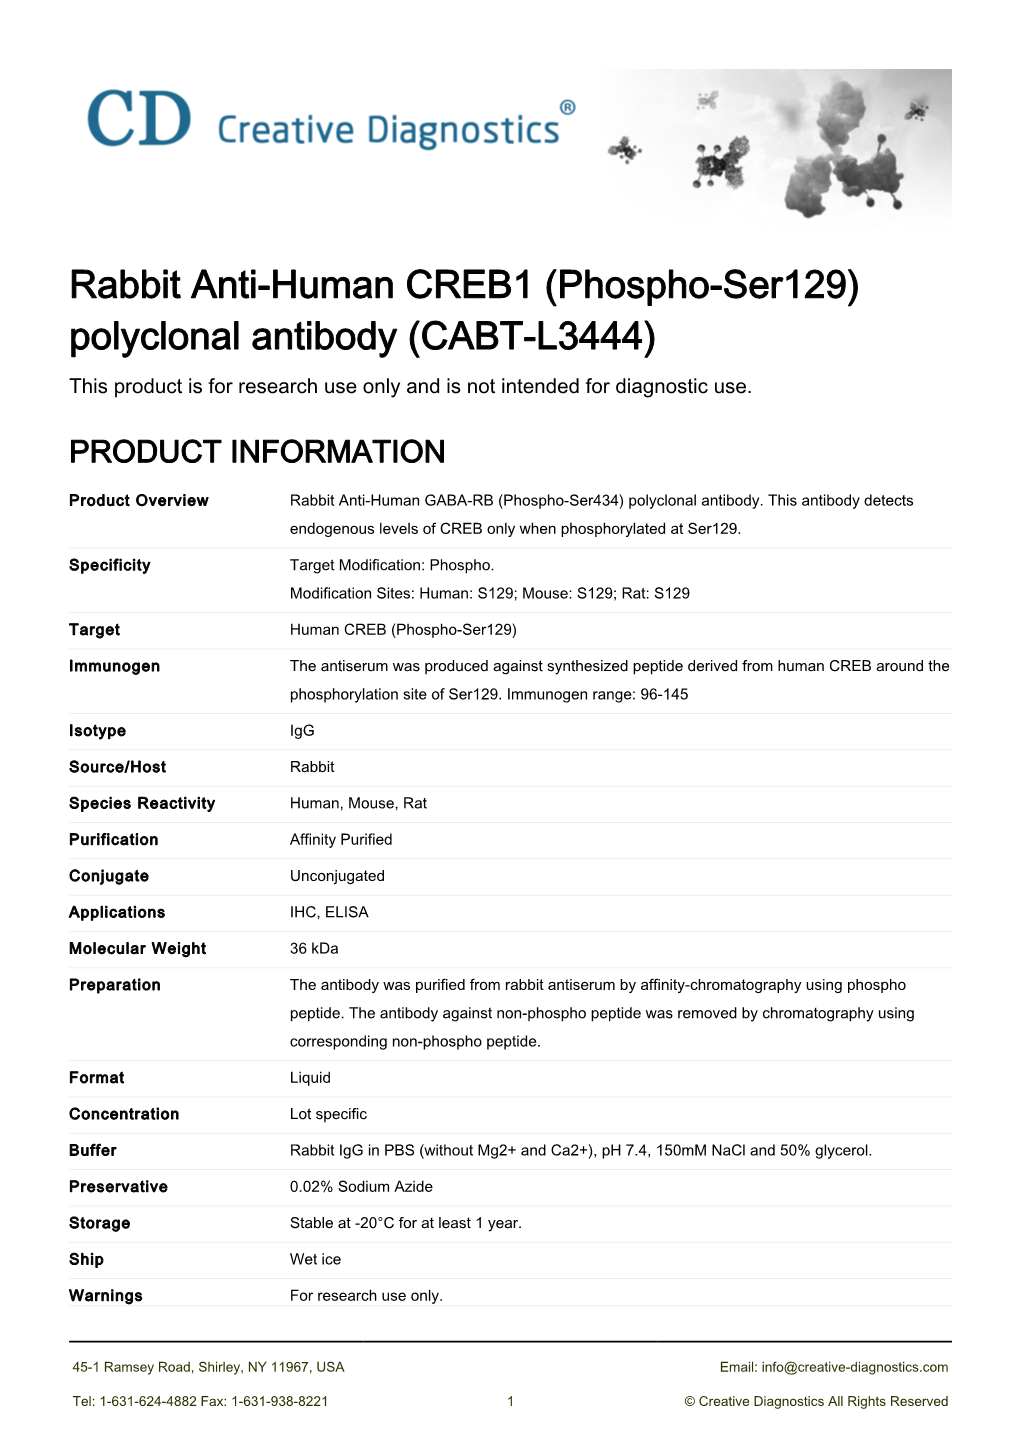 Rabbit Anti-Human CREB1 (Phospho-Ser129) Polyclonal Antibody (CABT-L3444) This Product Is for Research Use Only and Is Not Intended for Diagnostic Use